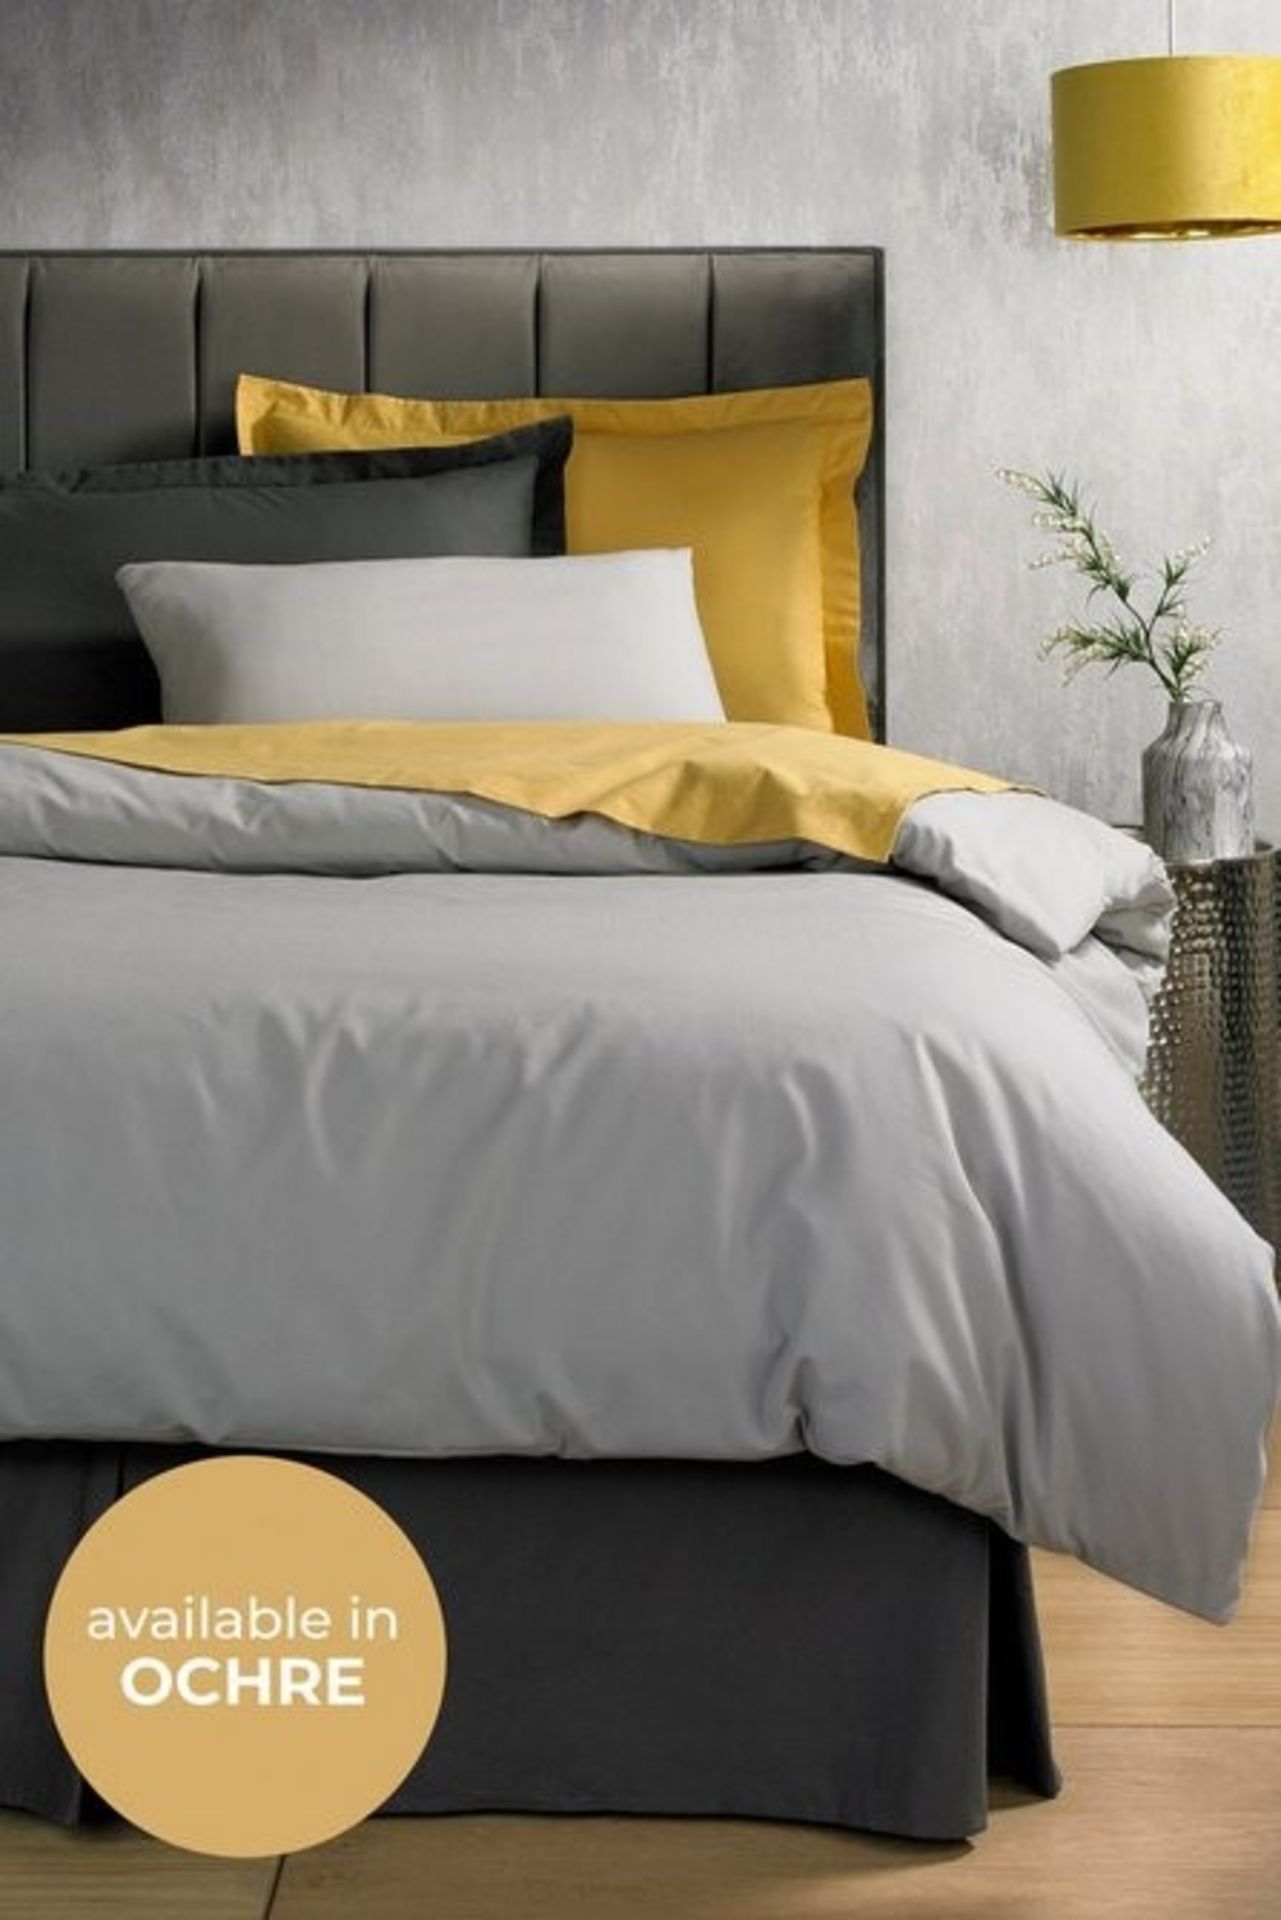 1 BAGGED SILENTNIGHT ULTIMATE COMFORT PERCALE PLAIN DYED FITTED SHEET IN OCHRE / SIZE 137 X 190CM (